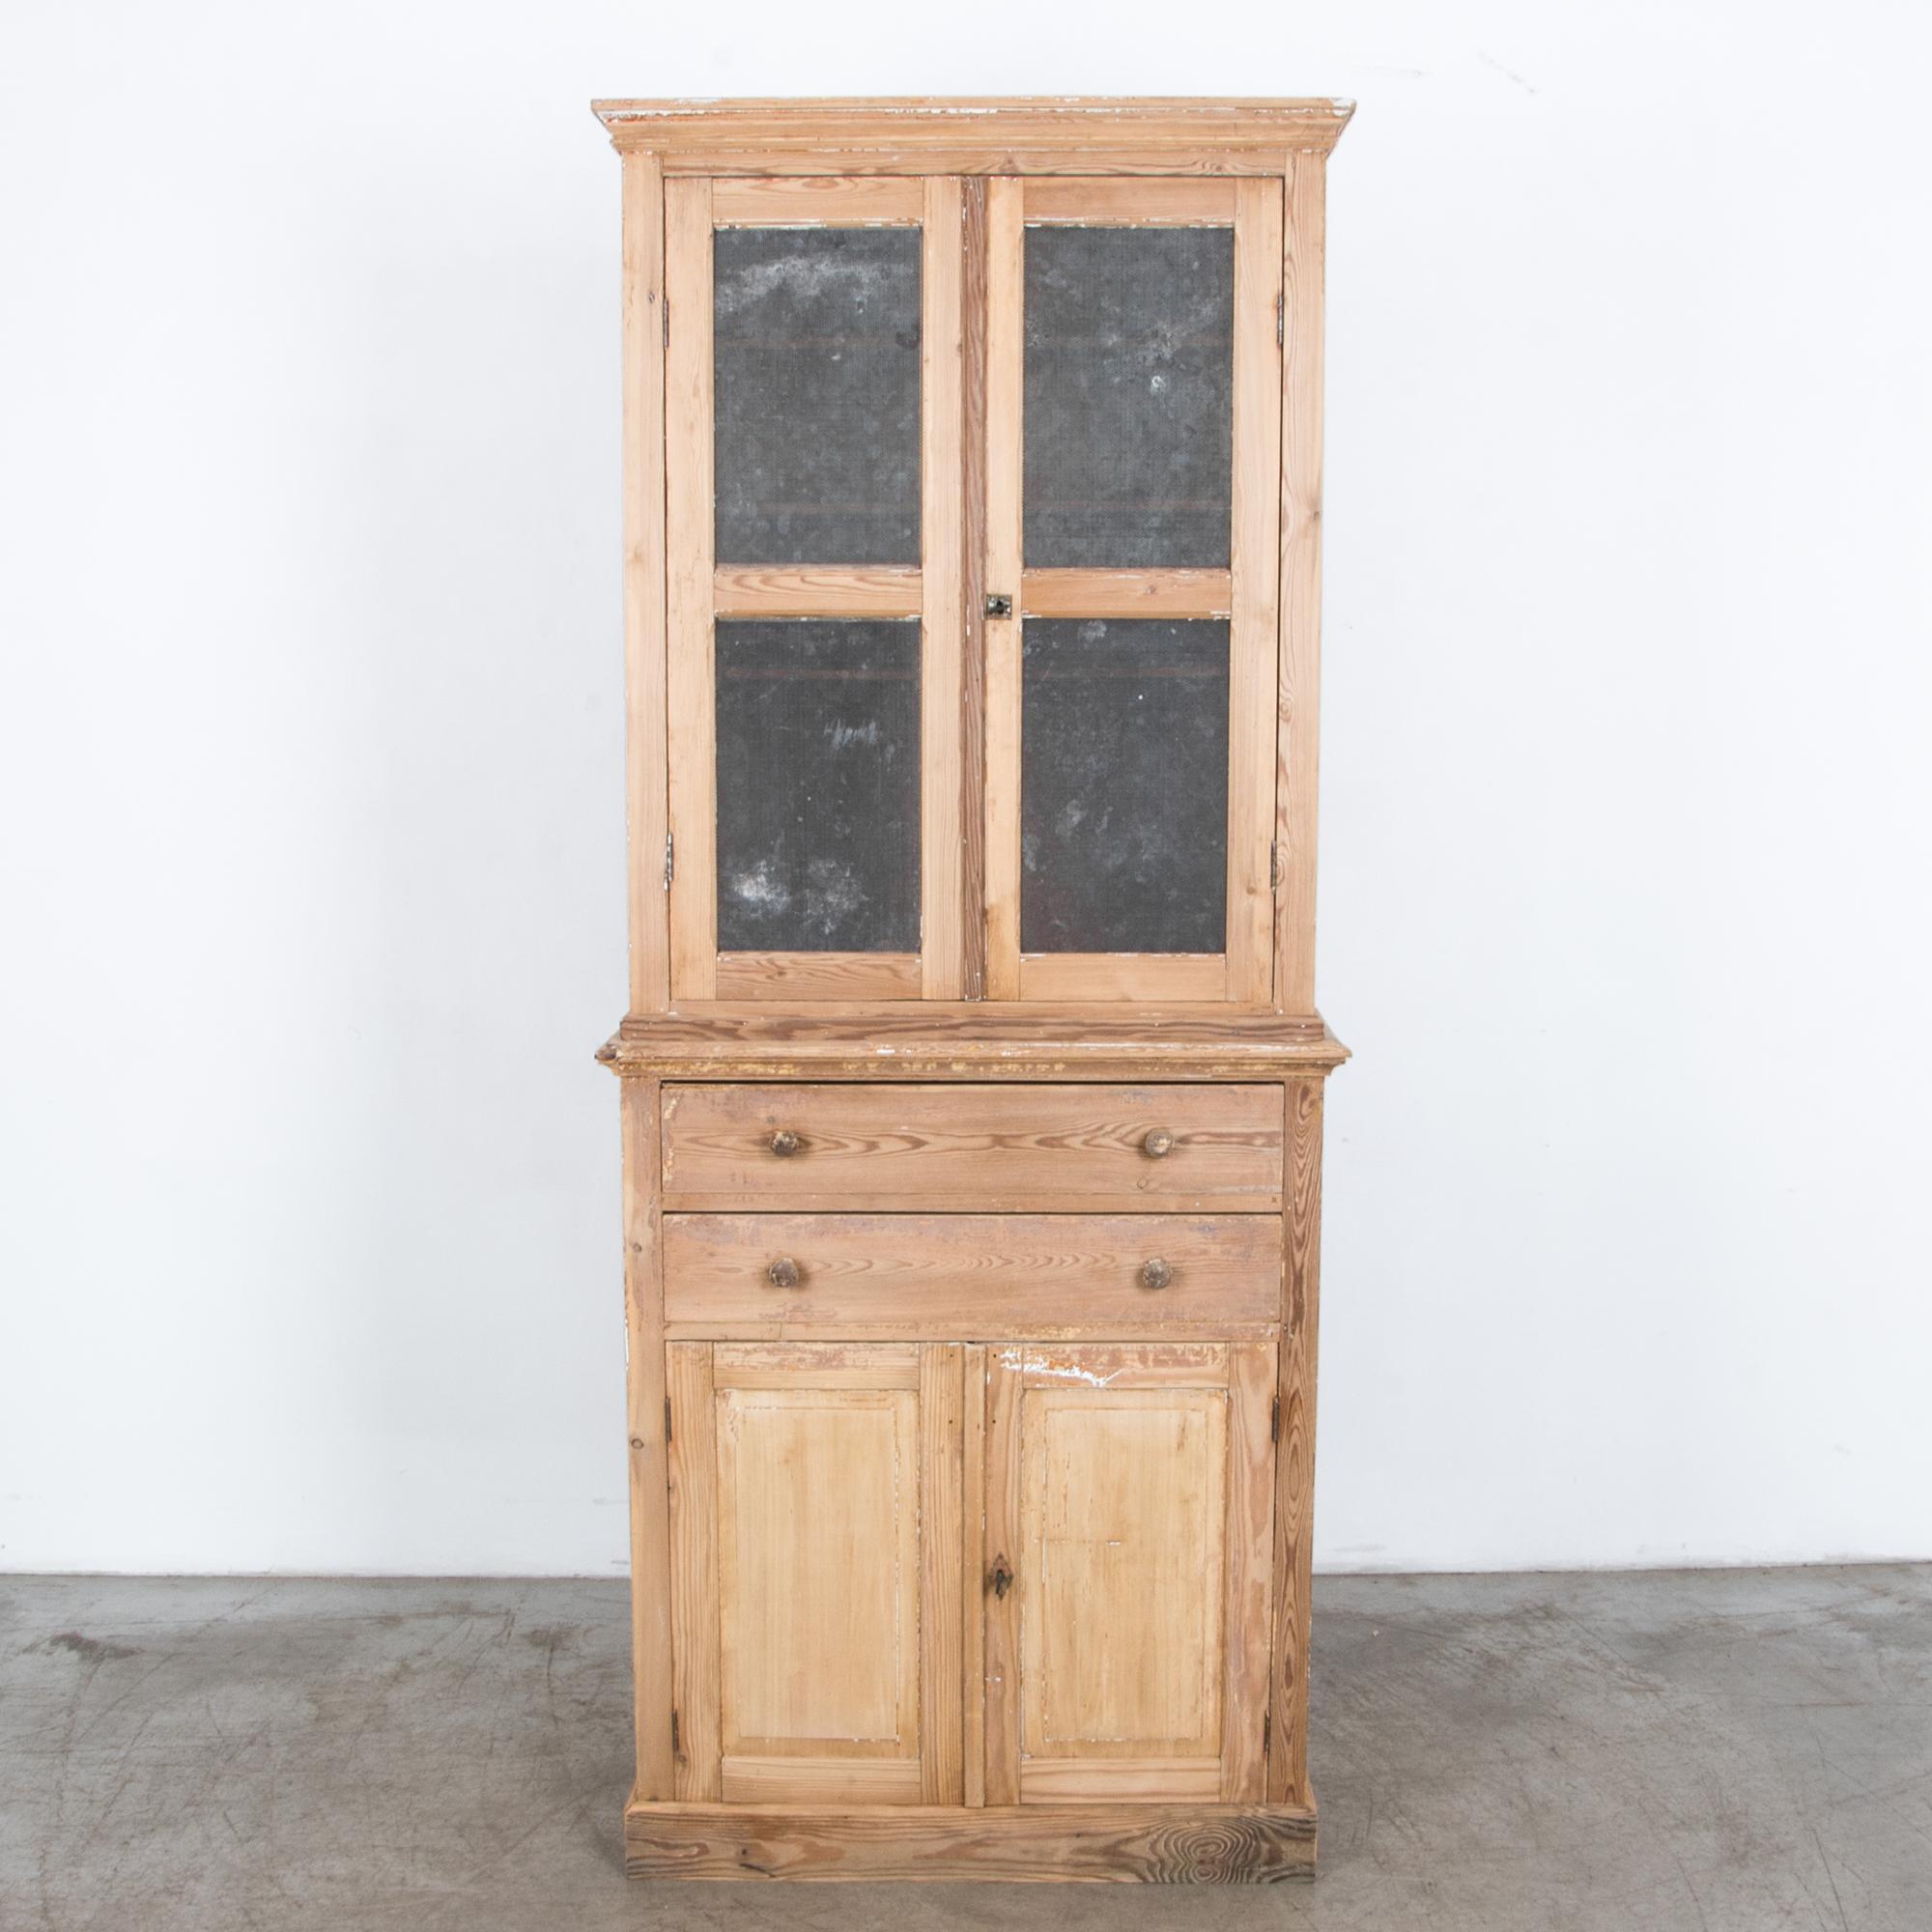 From France circa 1900, a tall cabinet with mesh covered upper doors. Originally used as a storage for dry goods and kitchenware, a perforated metal mesh protected the pantry contents. Distinctive period design is highlighted by the unique finish, a